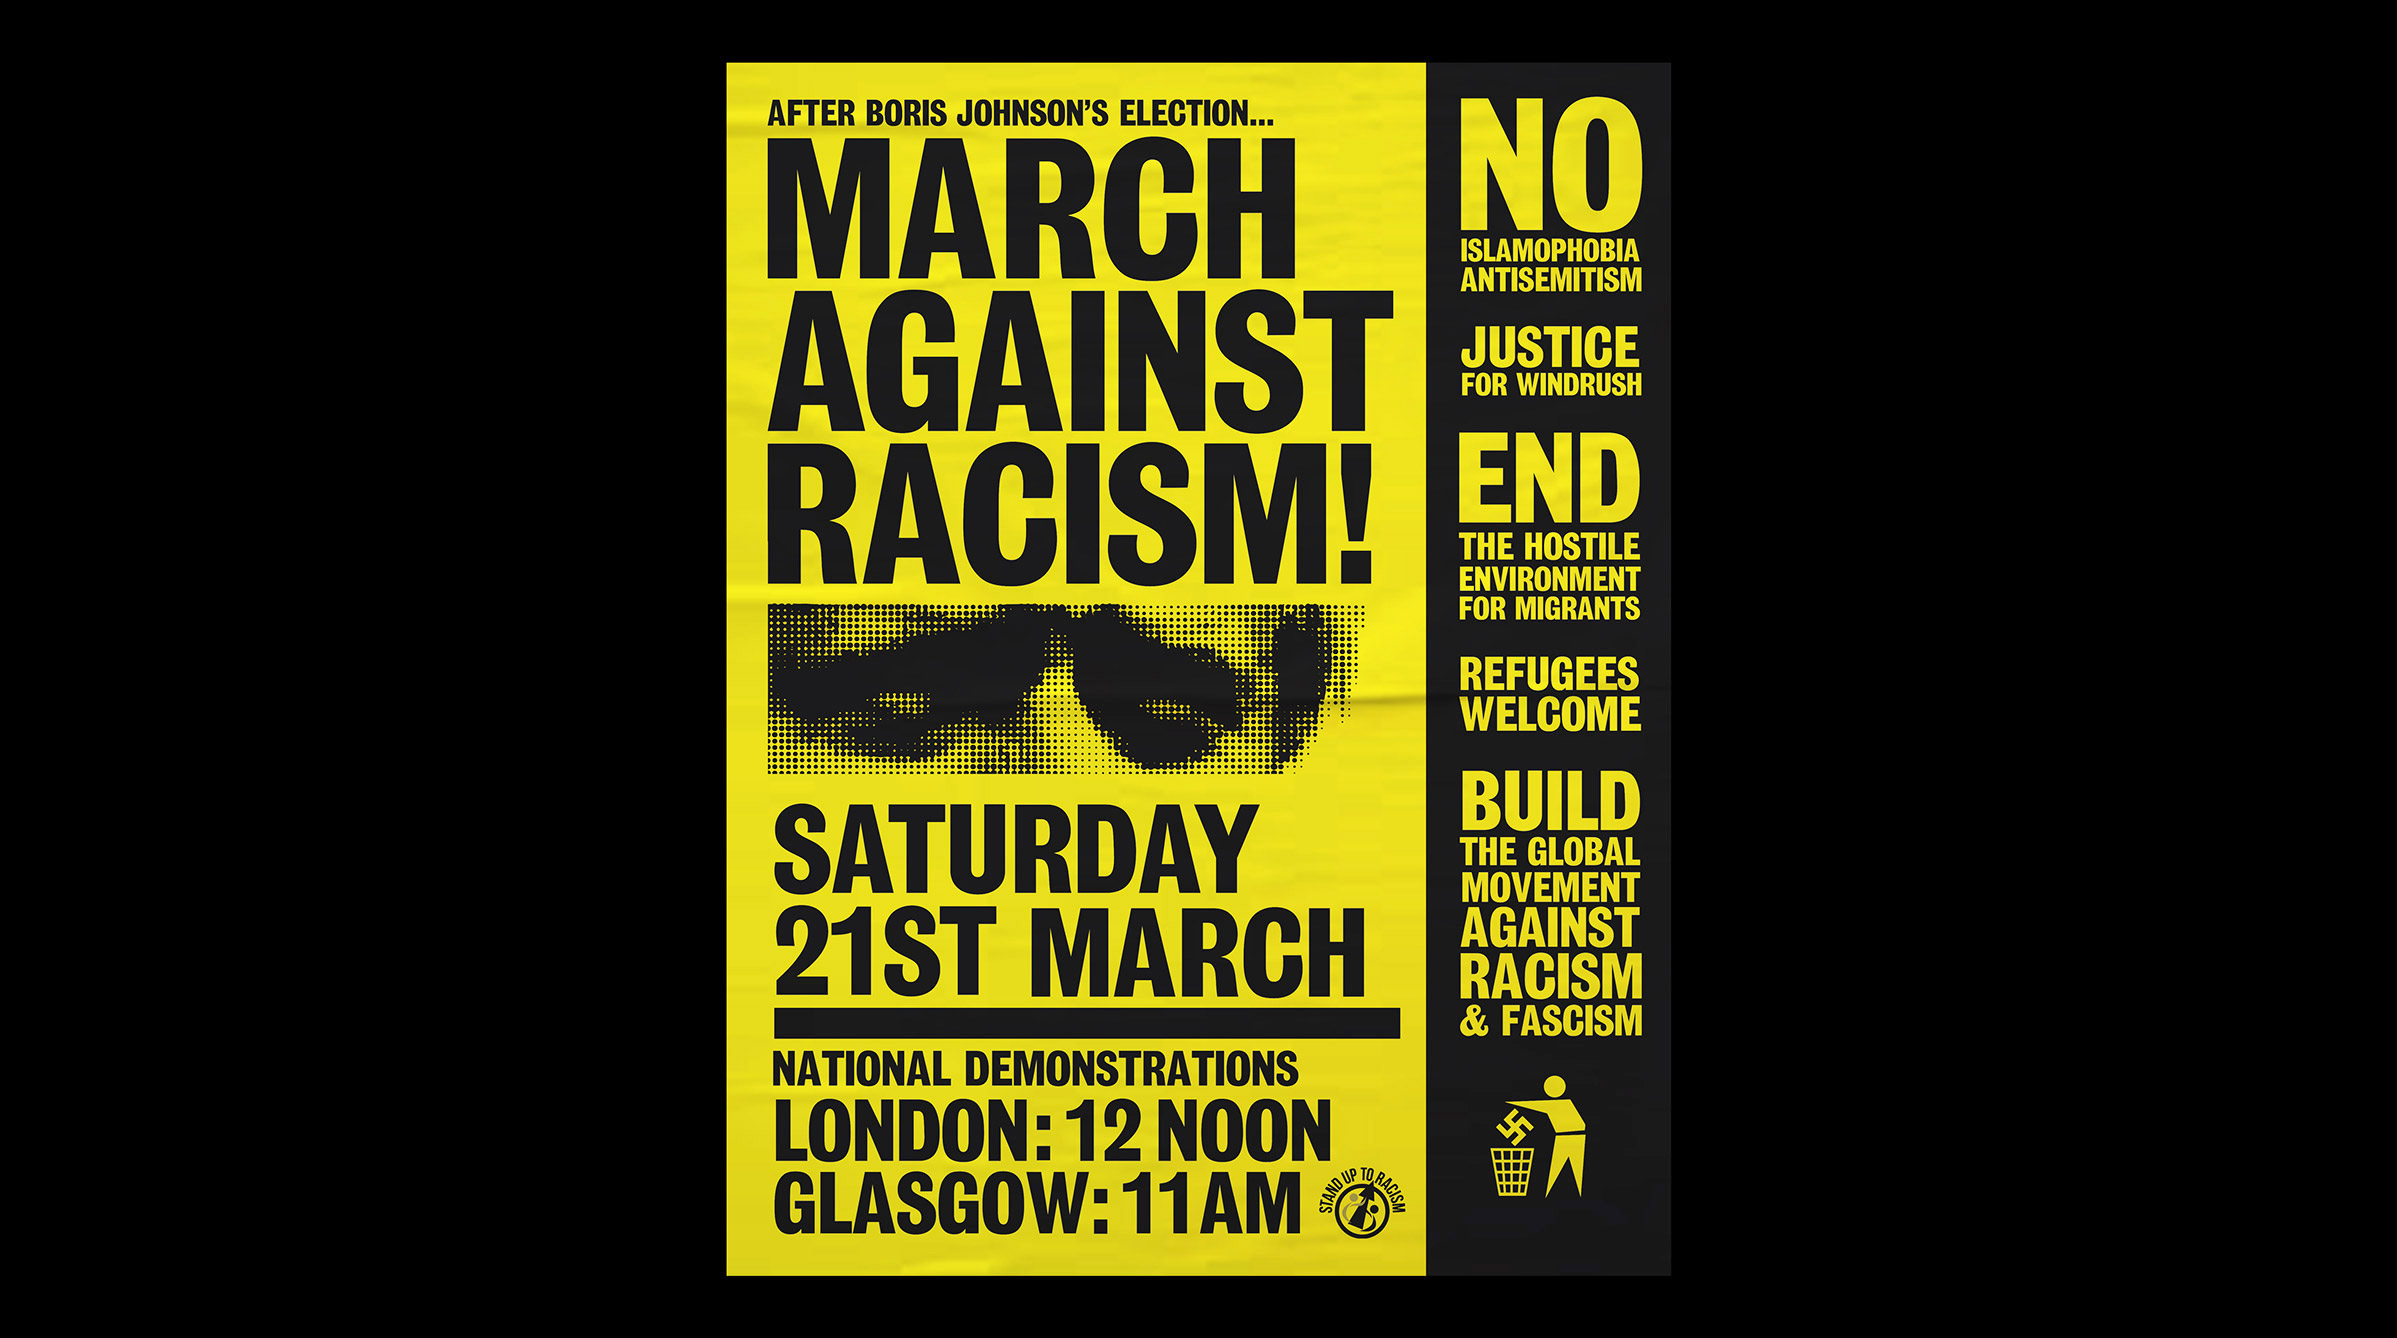 March Against Racism! –